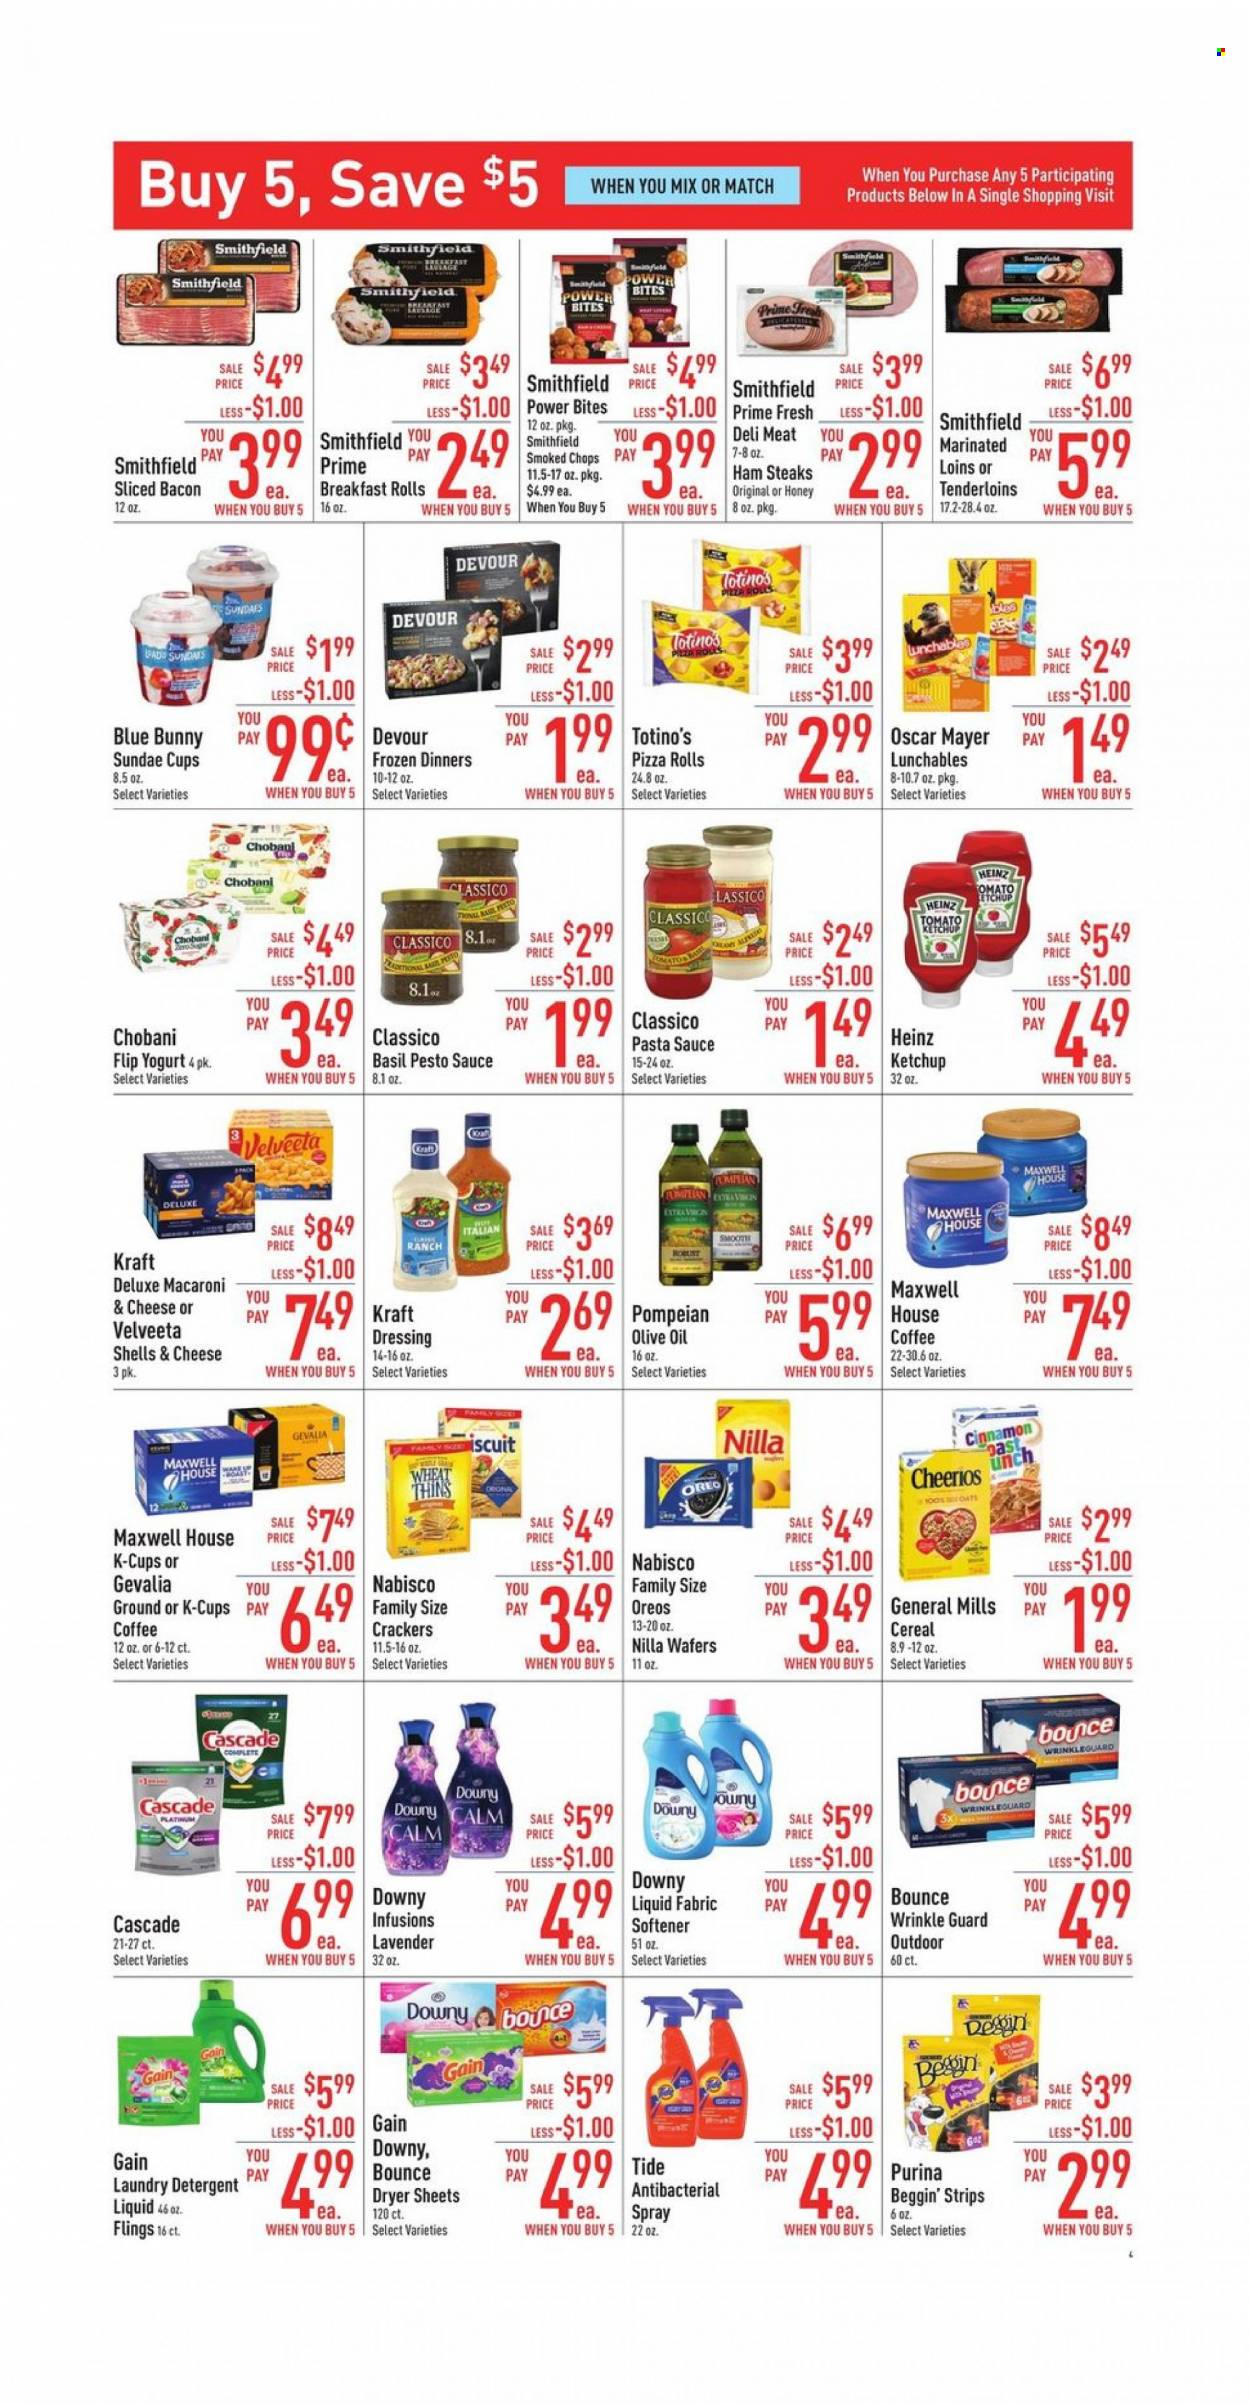 thumbnail - Strack & Van Til Flyer - 03/22/2023 - 03/28/2023 - Sales products - pizza rolls, pizza, pasta sauce, macaroni, sauce, Lunchables, Kraft®, roast, bacon, ham, Oscar Mayer, sausage, ham steaks, Oreo, yoghurt, Chobani, Blue Bunny, strips, Devour, wafers, crackers, Thins, Heinz, cereals, Cheerios, cinnamon, ketchup, pesto, dressing, Classico, basil pesto, extra virgin olive oil, olive oil, oil, Maxwell House, coffee, coffee capsules, K-Cups, Gevalia, steak, detergent, Gain, Cascade, Tide, fabric softener, laundry detergent, Bounce, dryer sheets, Downy Laundry. Page 4.